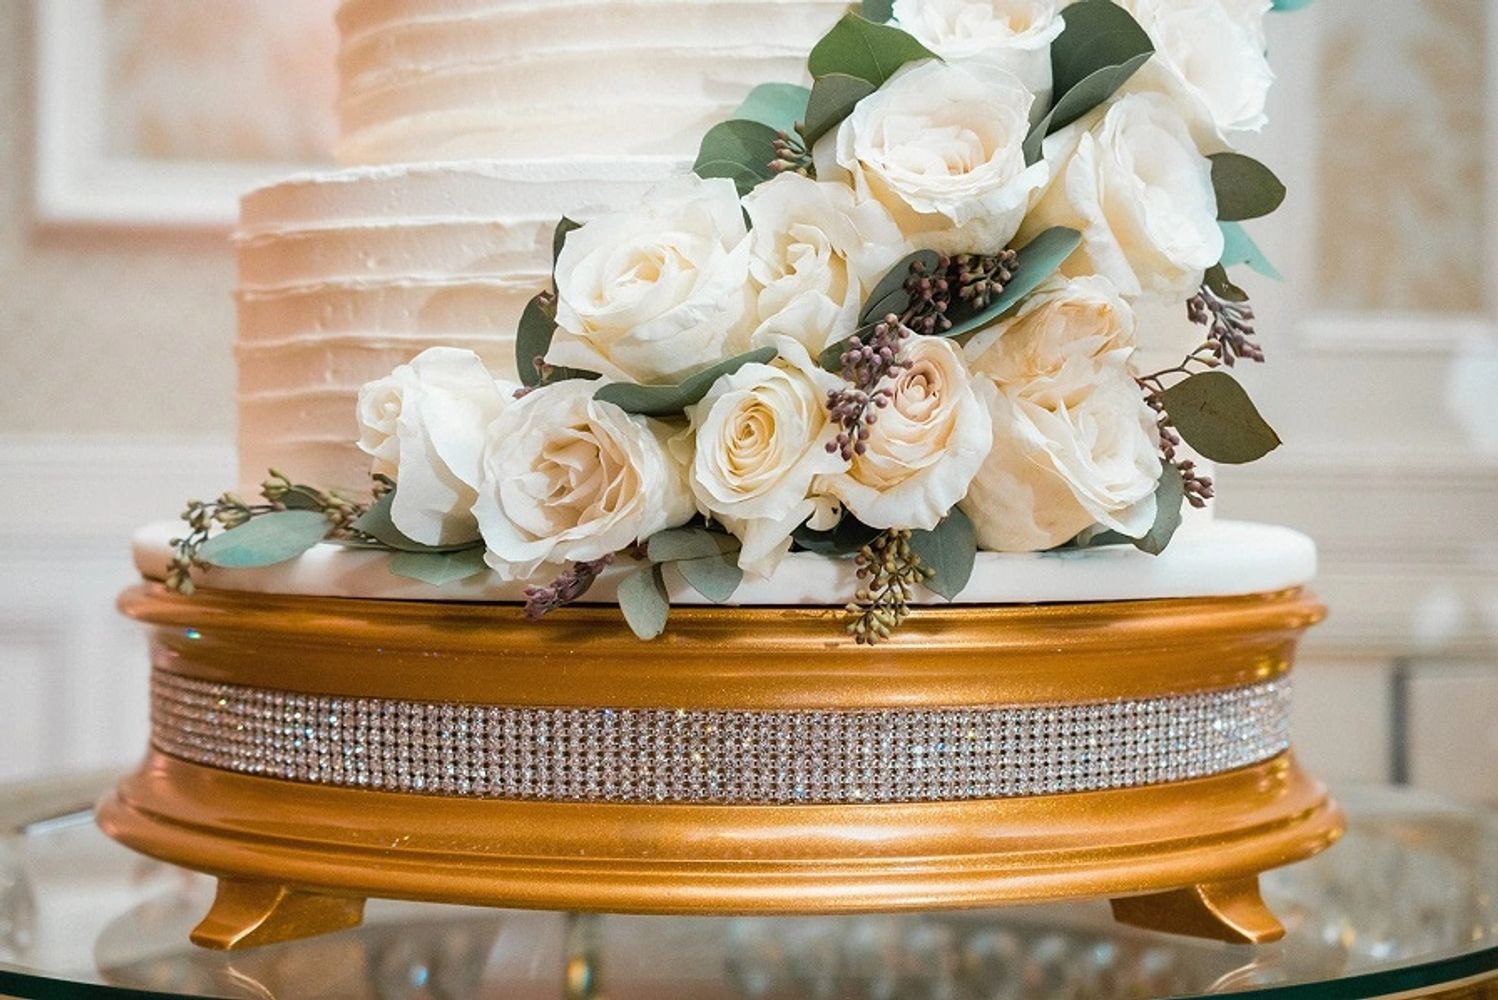 White frosting iced wedding cake with horizontal lines, sitting on top of a gold cake stand.